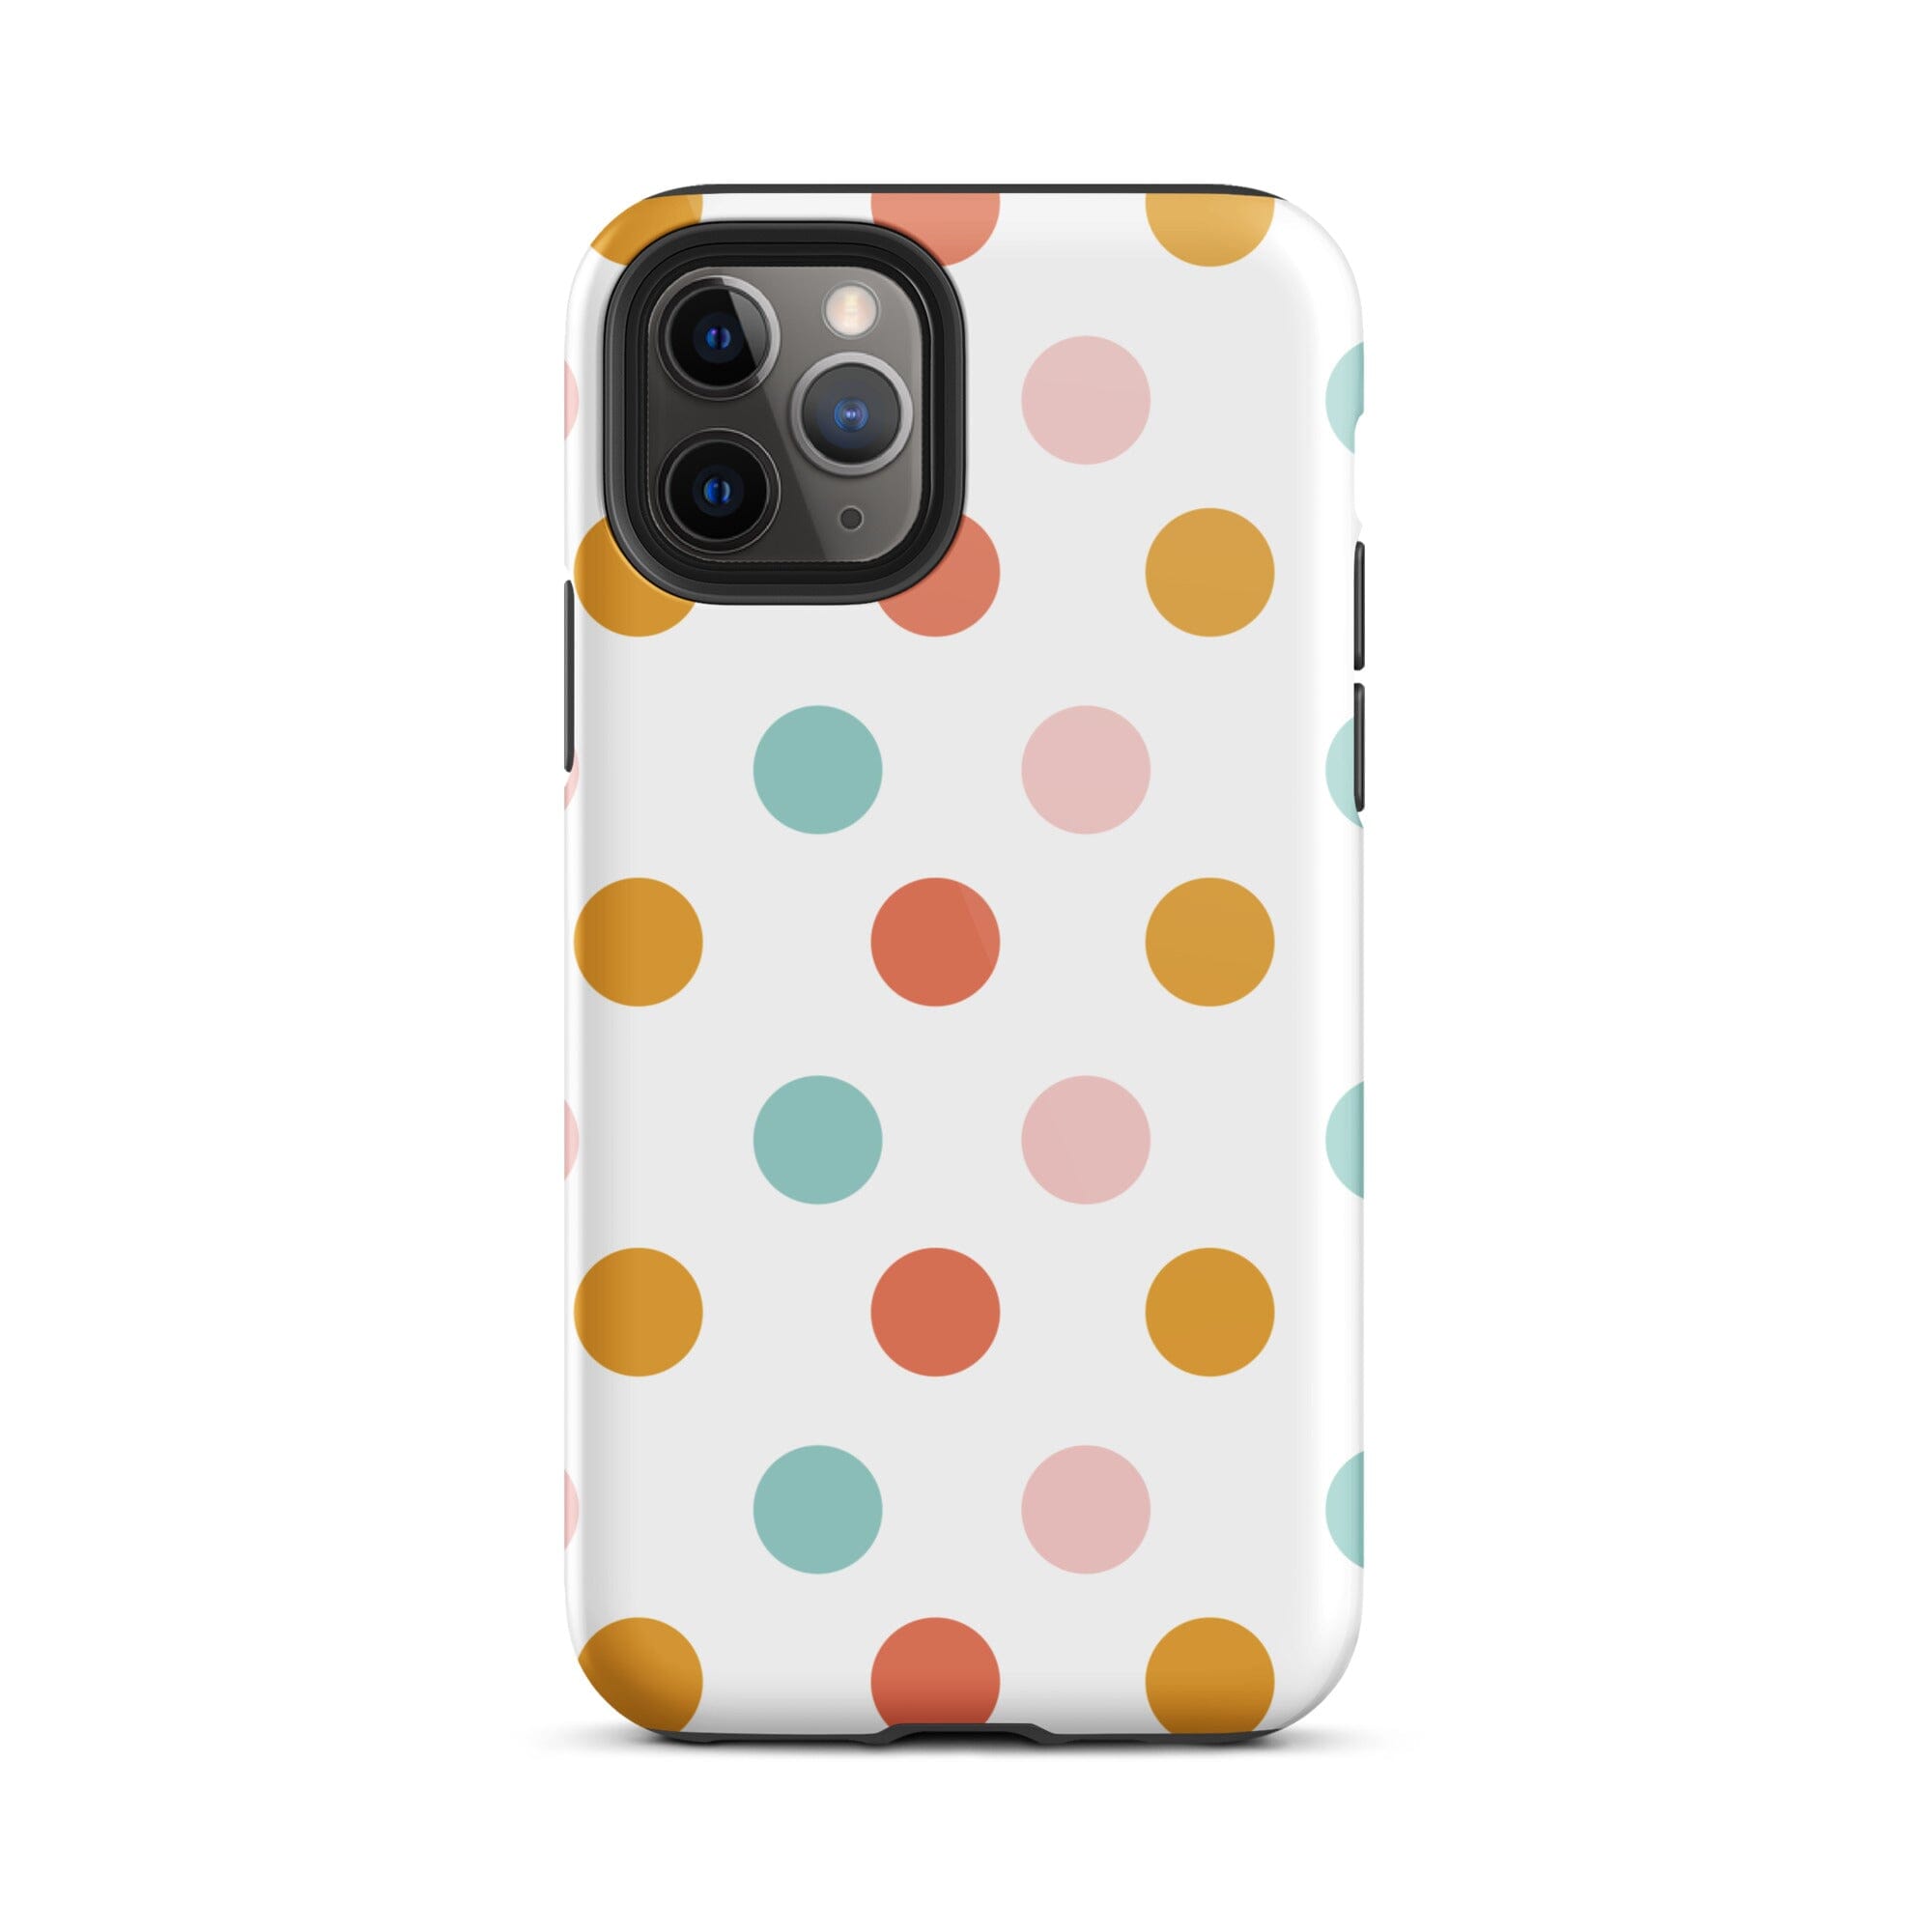 Polka Dots iPhone Case Knitted Belle Boutique iPhone 11 